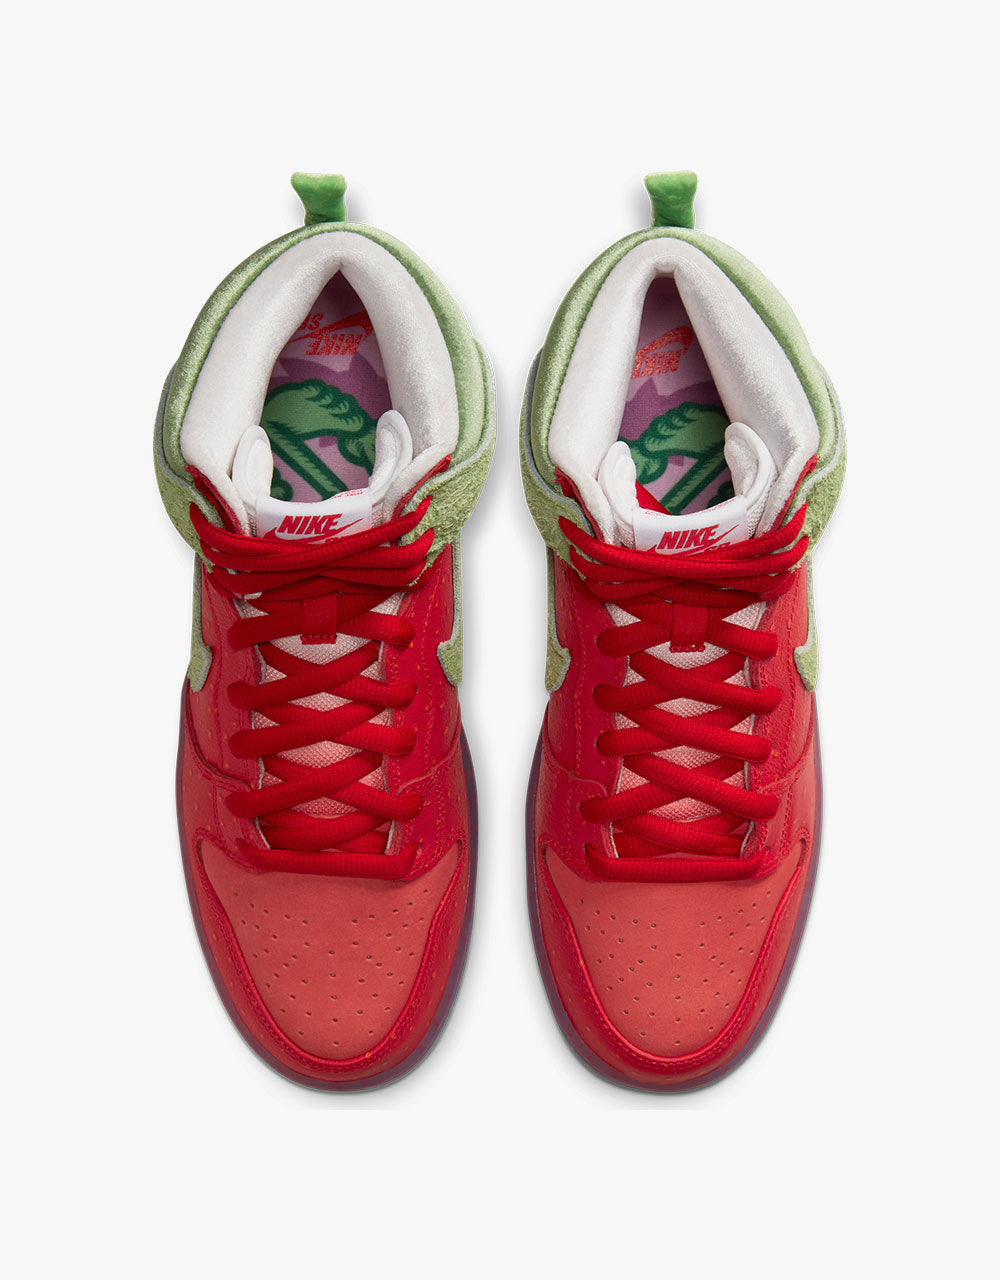 Nike SB 'Strawberry Cough' Dunk High - University Red/Spinach Green-Magic Ember